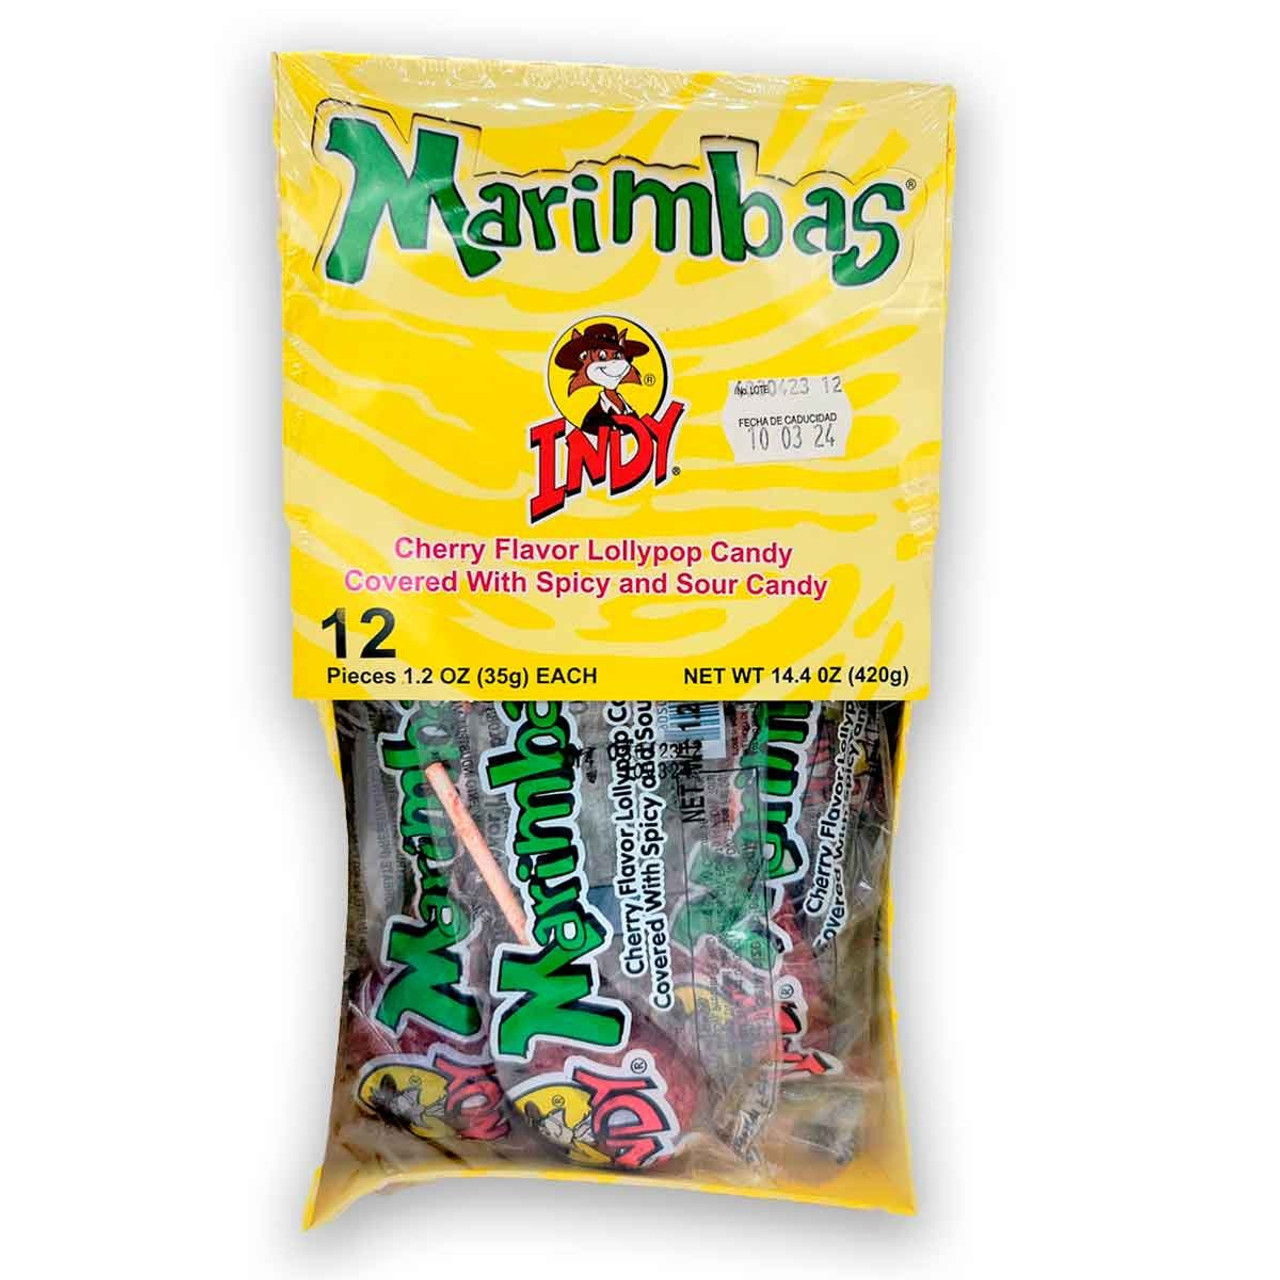 Marimbas are cherry flavored lollipops that are covered with a spicy and sour chili paste and have a delicious gum center. Marimbas are the ideal option to satisfy your sweet tooth. Try this delicious candy that gives you sweetness and spice all in one bite.